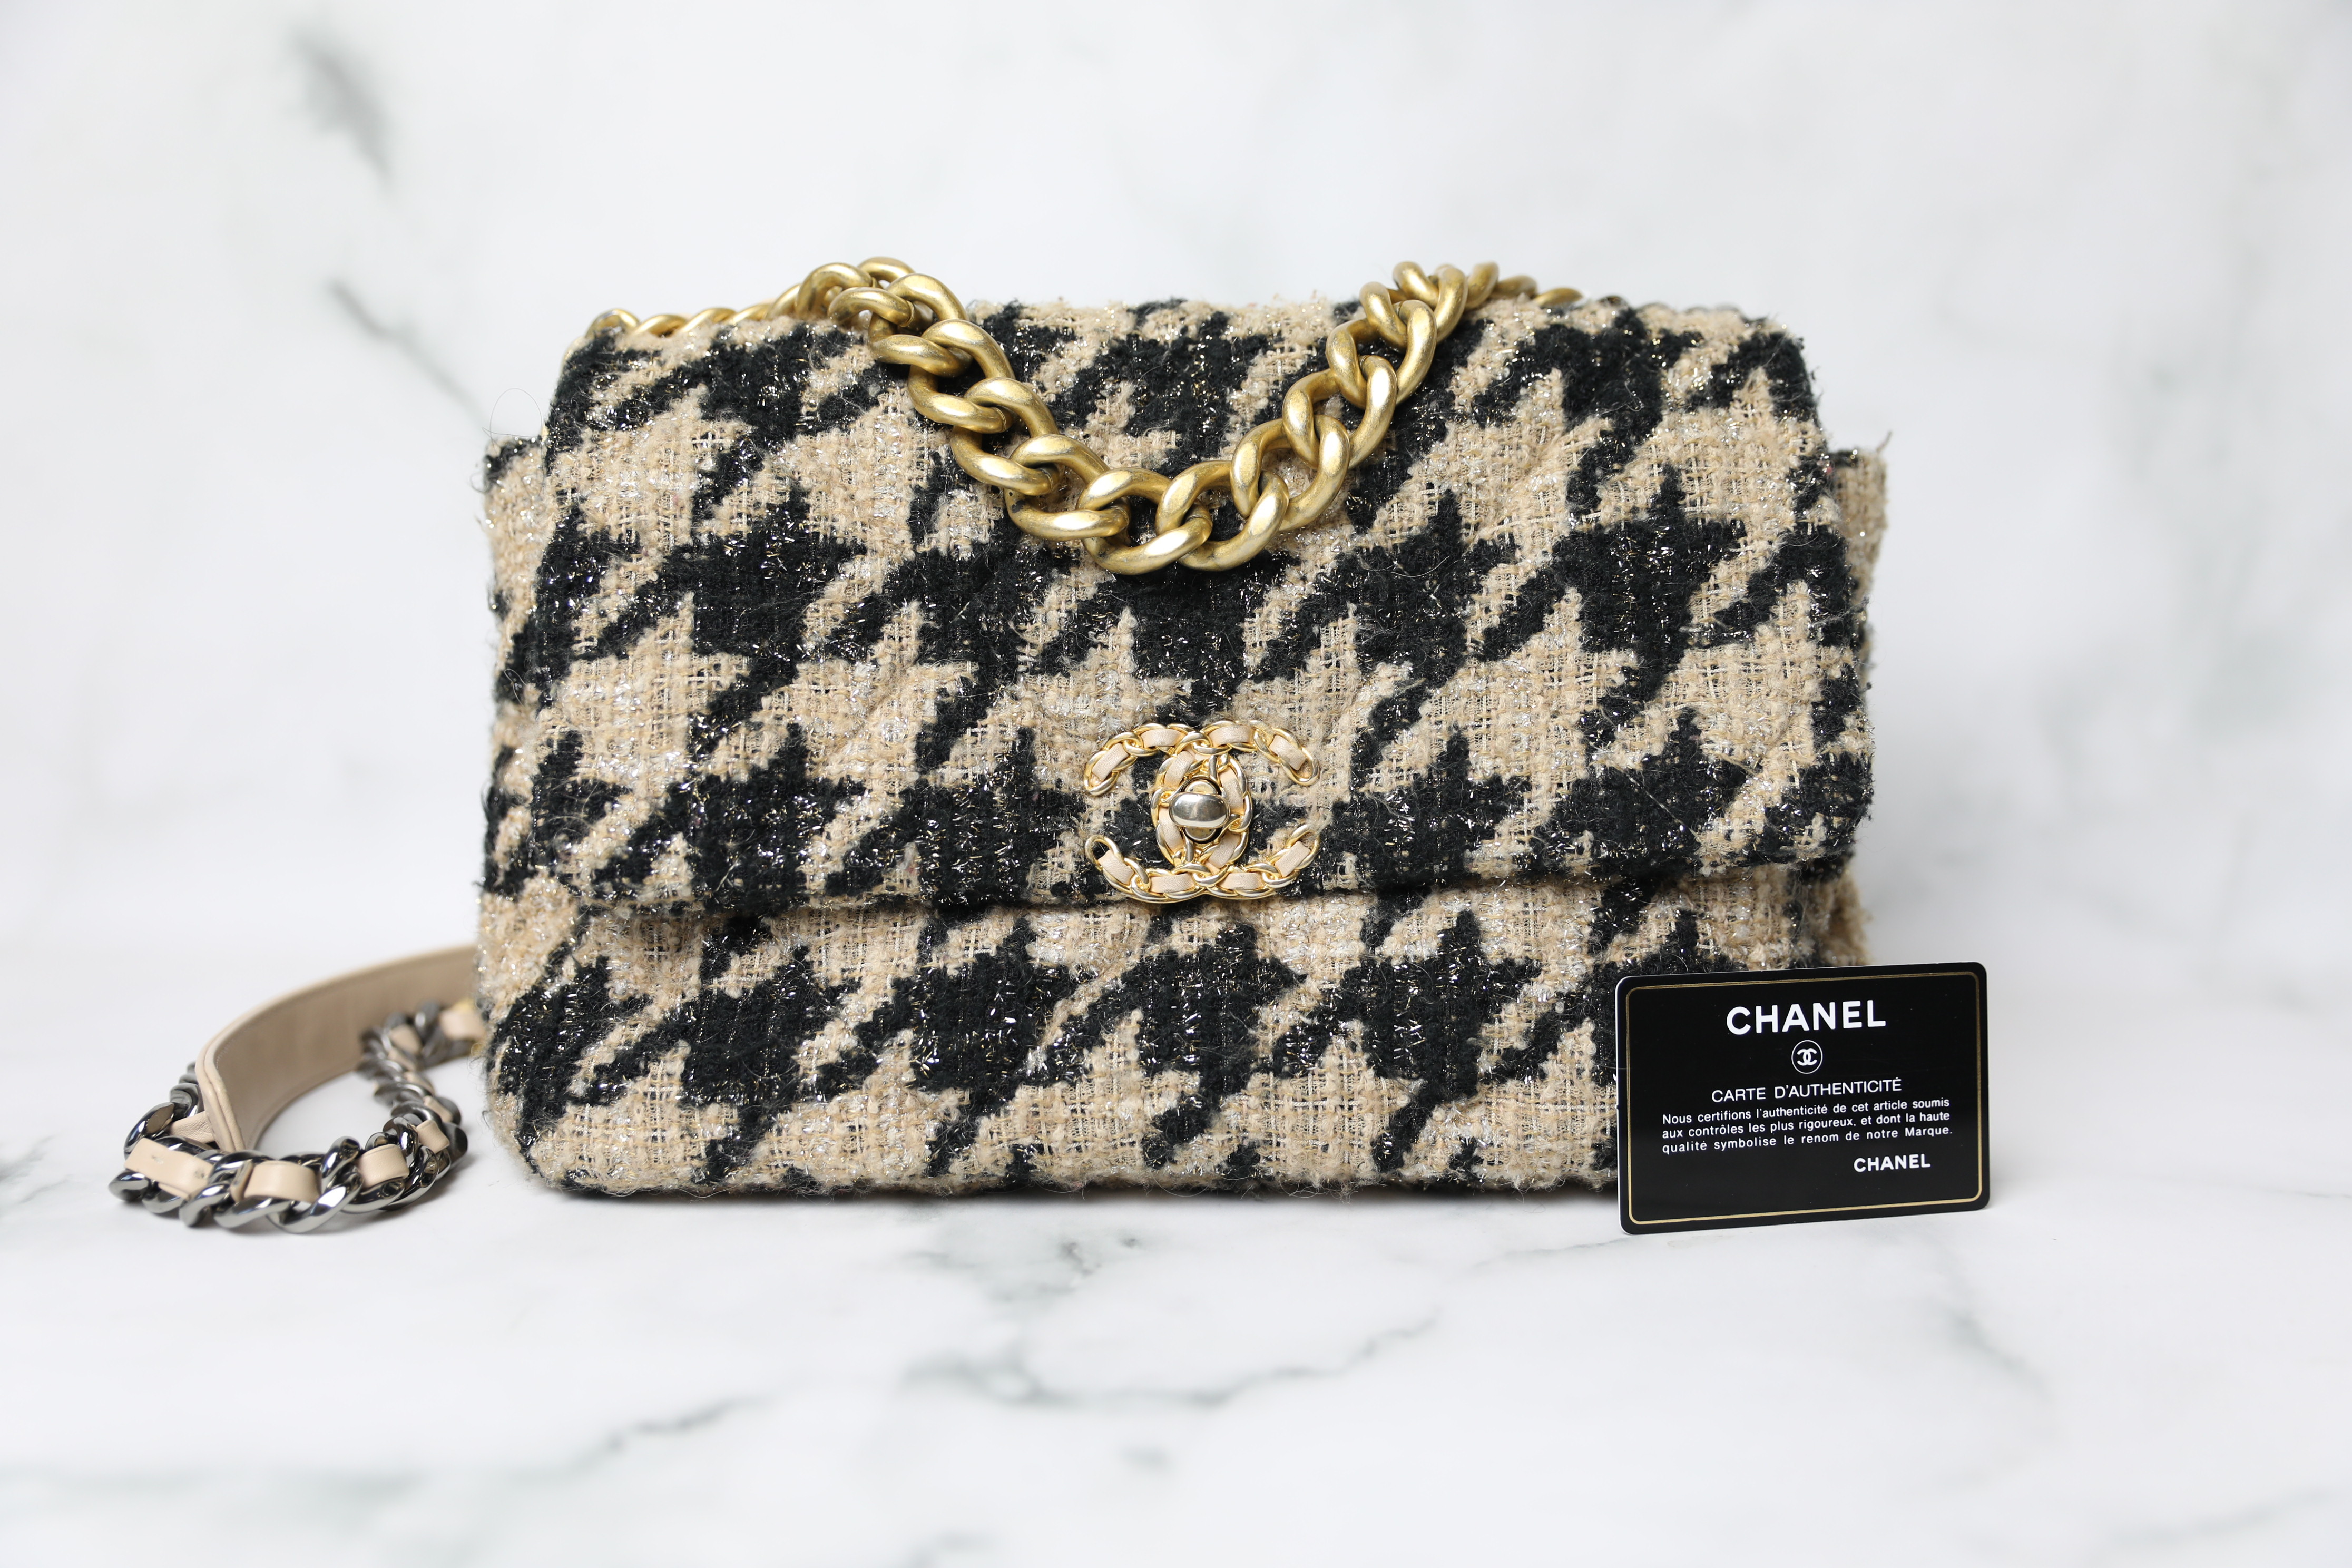 Chanel 19 Jumbo, Beige and Black Houndstooth Tweed, Preowned